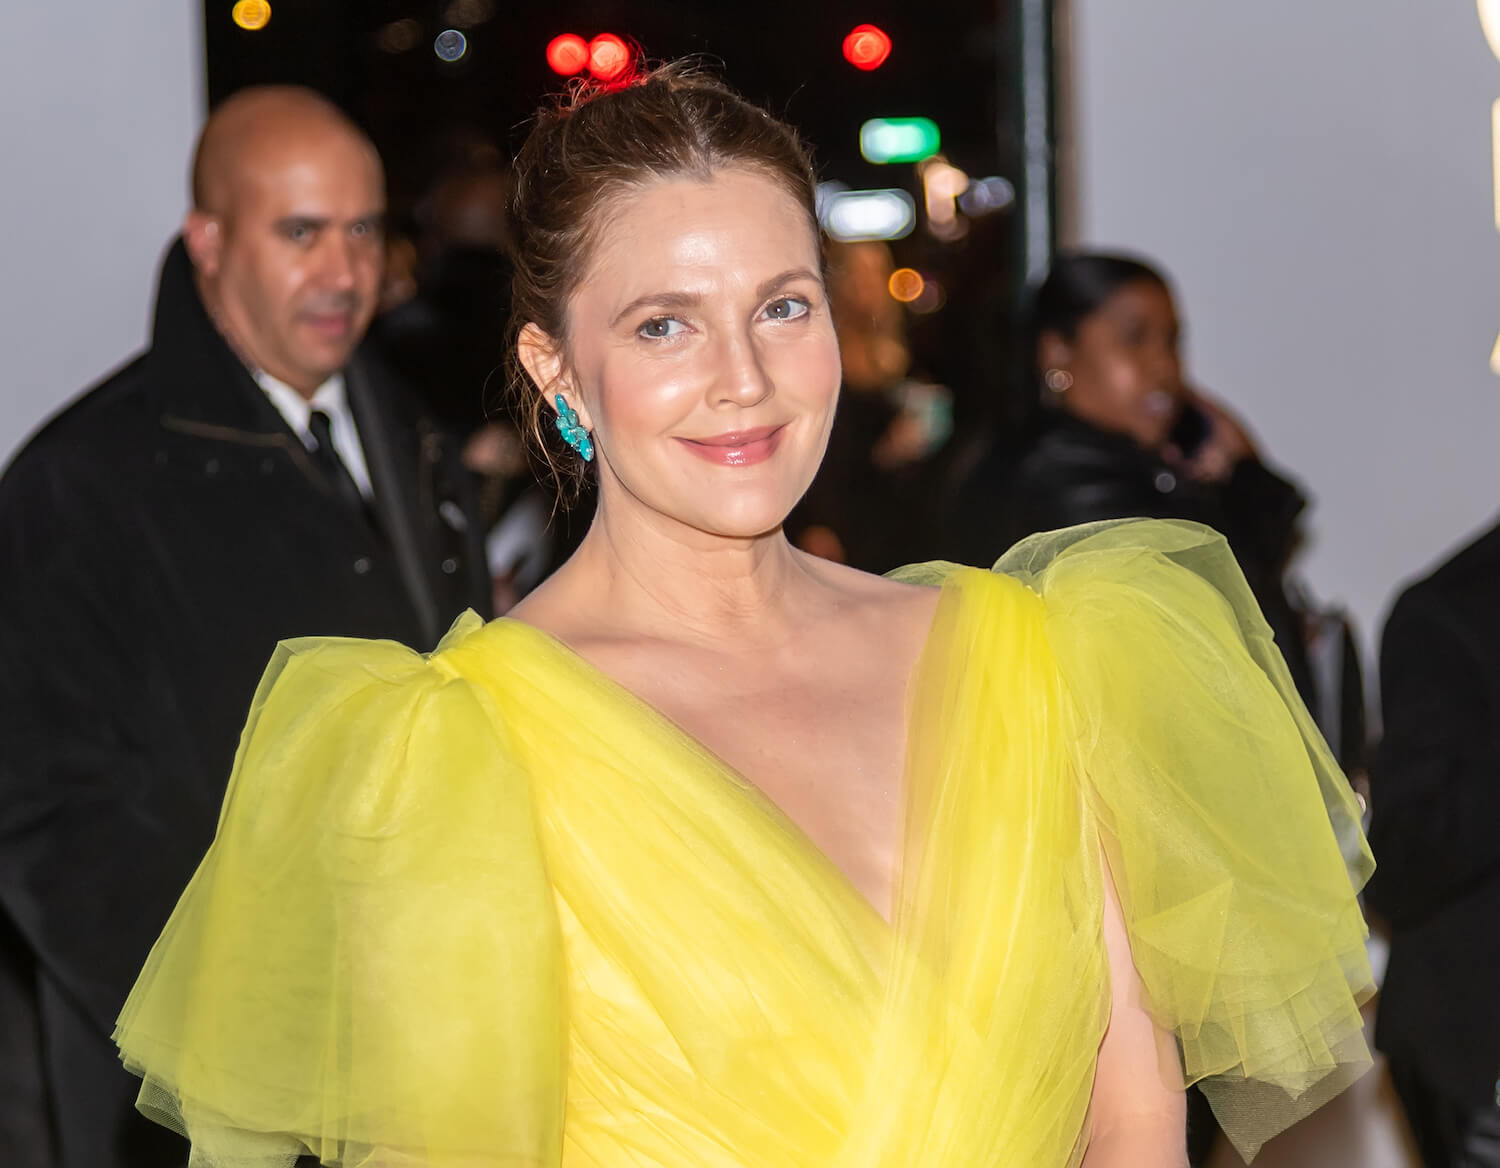 Drew Barrymore from 'The Drew Barrymore Show' dressed in a yellow gown at an event